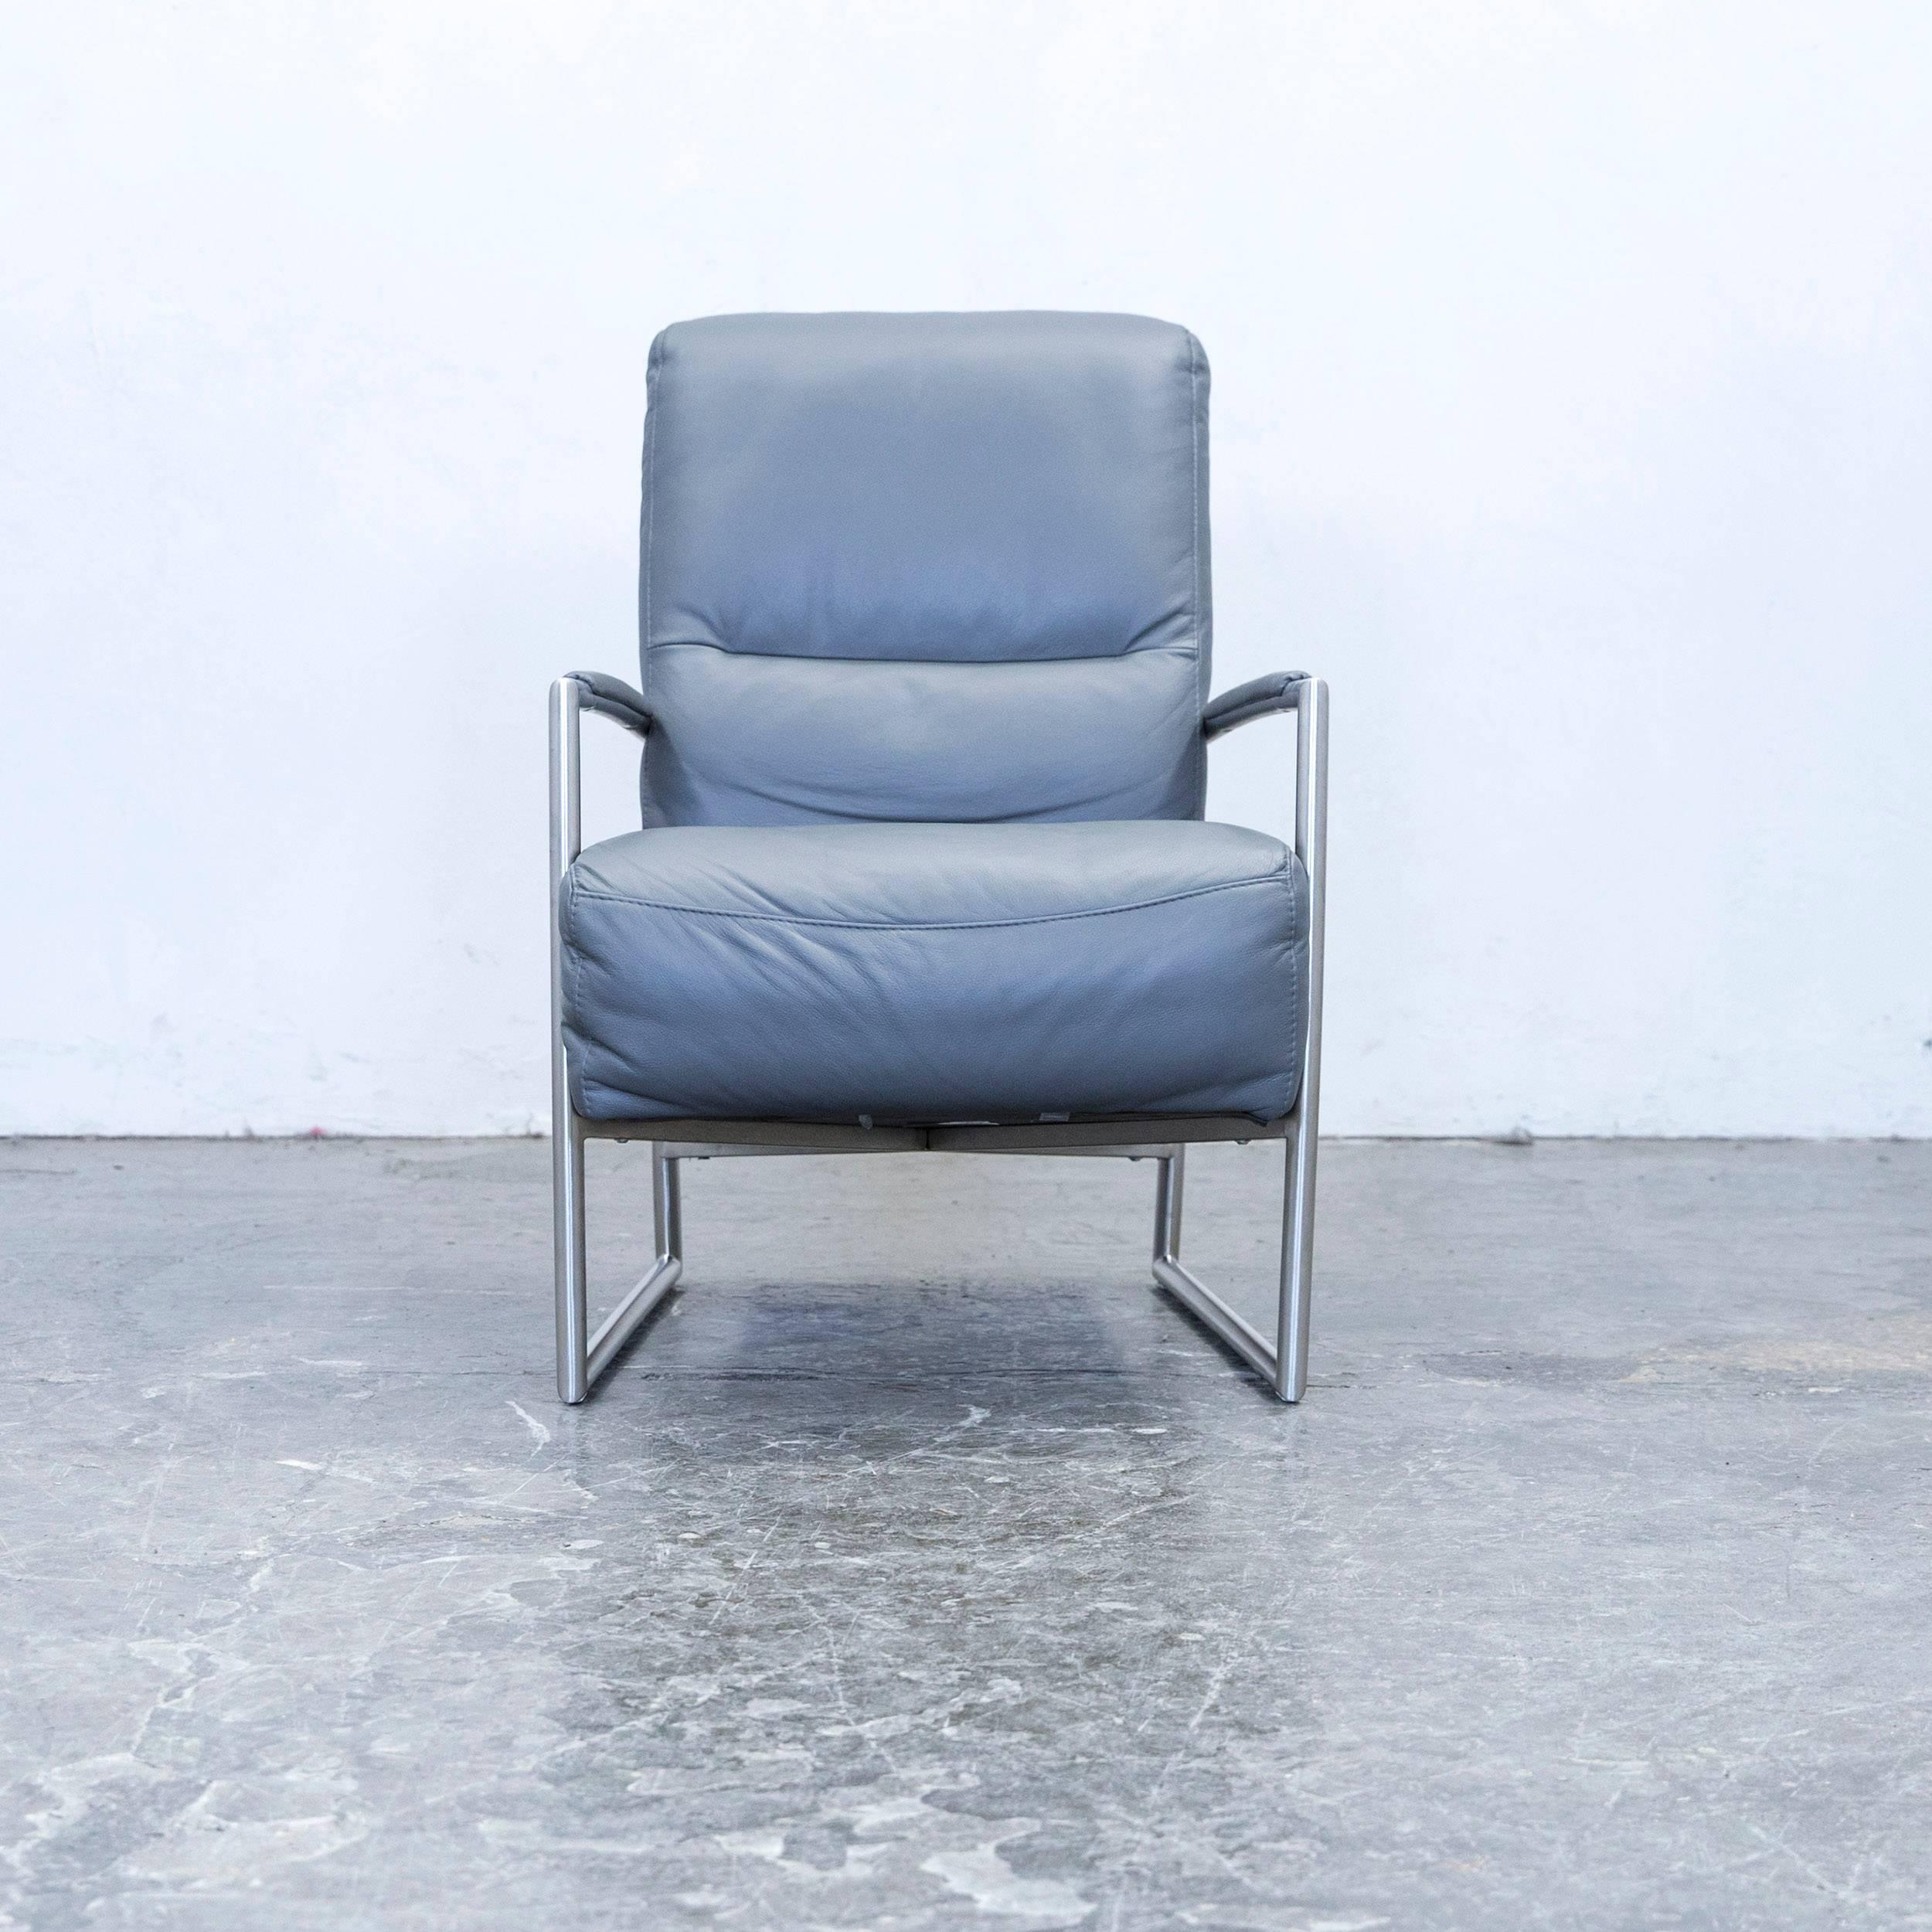 Grey colored Musterring designer leather armchair, in a minimalistic and modern design, made for pure comfort.